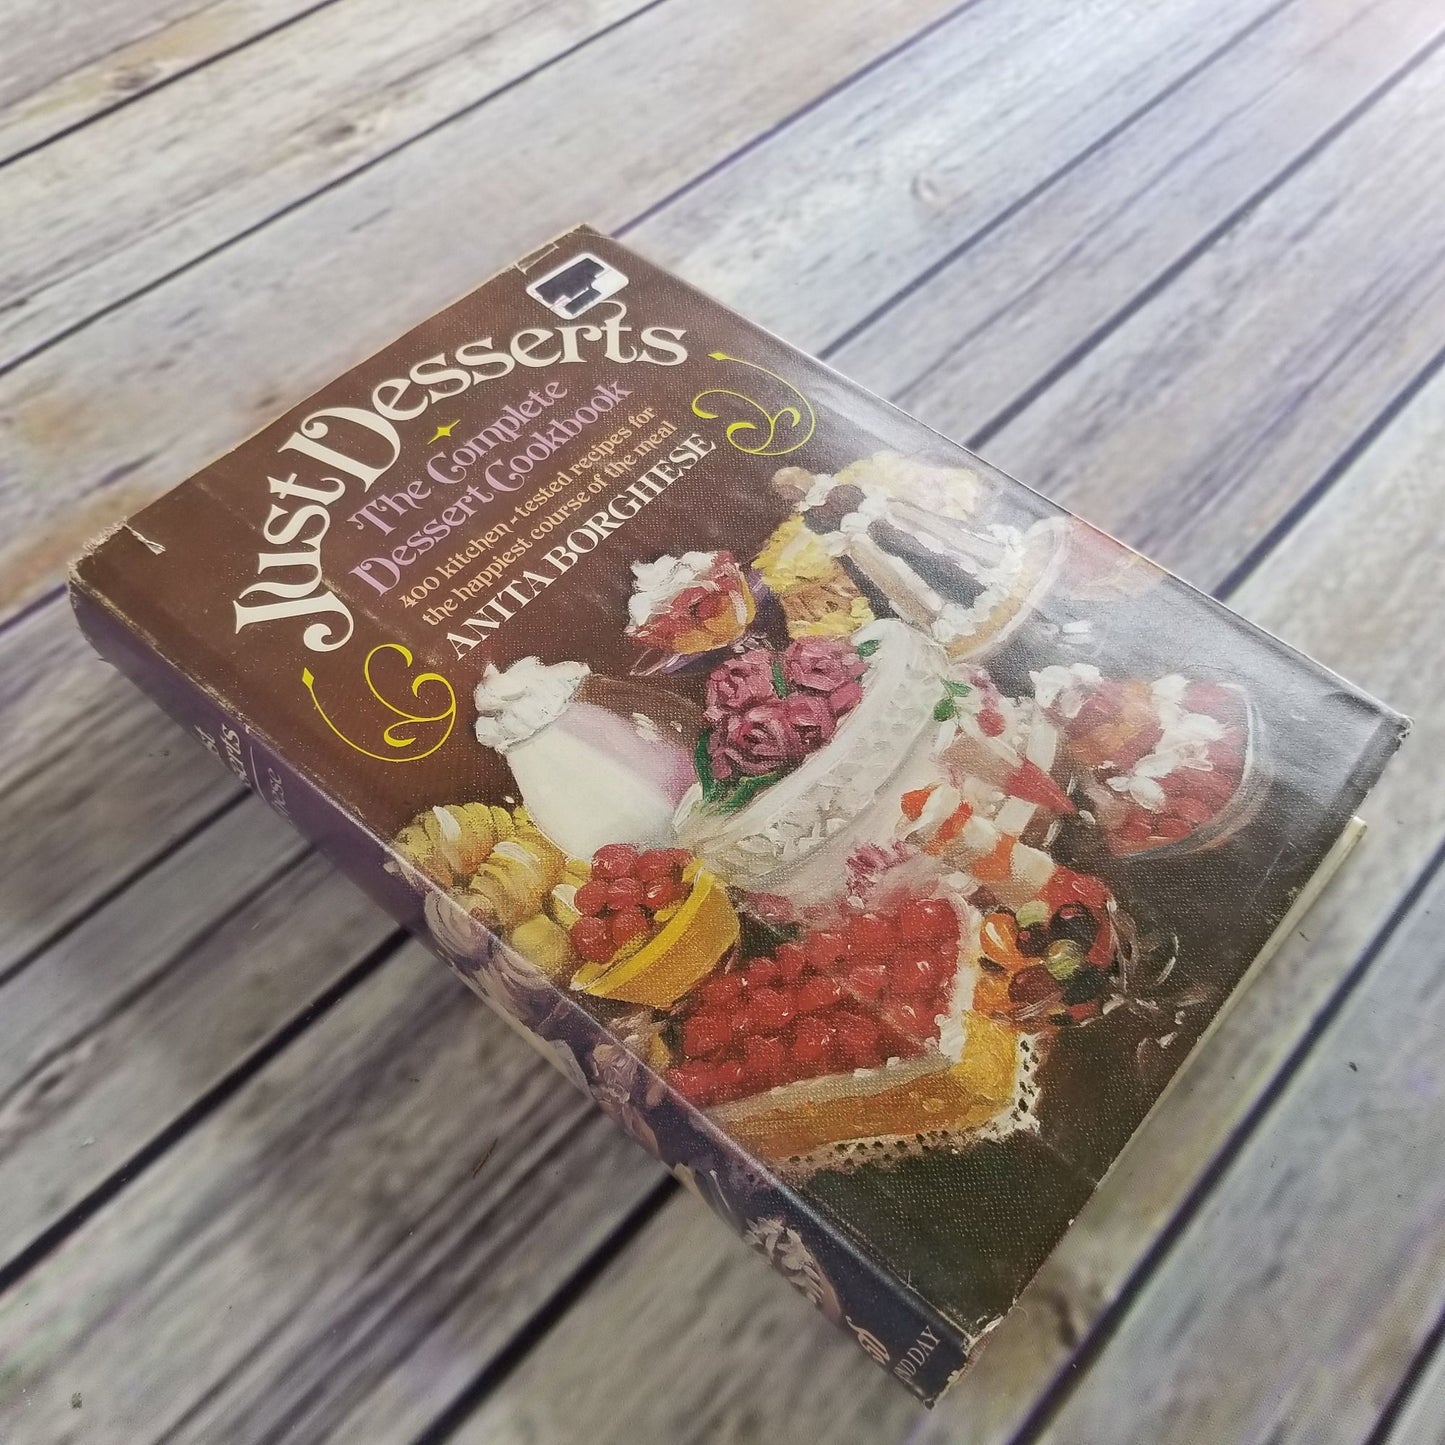 Vintage Desserts Cookbook Just Desserts Recipes 1977 Hardcover WITH Dust Jacket Anita Borghese 400 Recipes